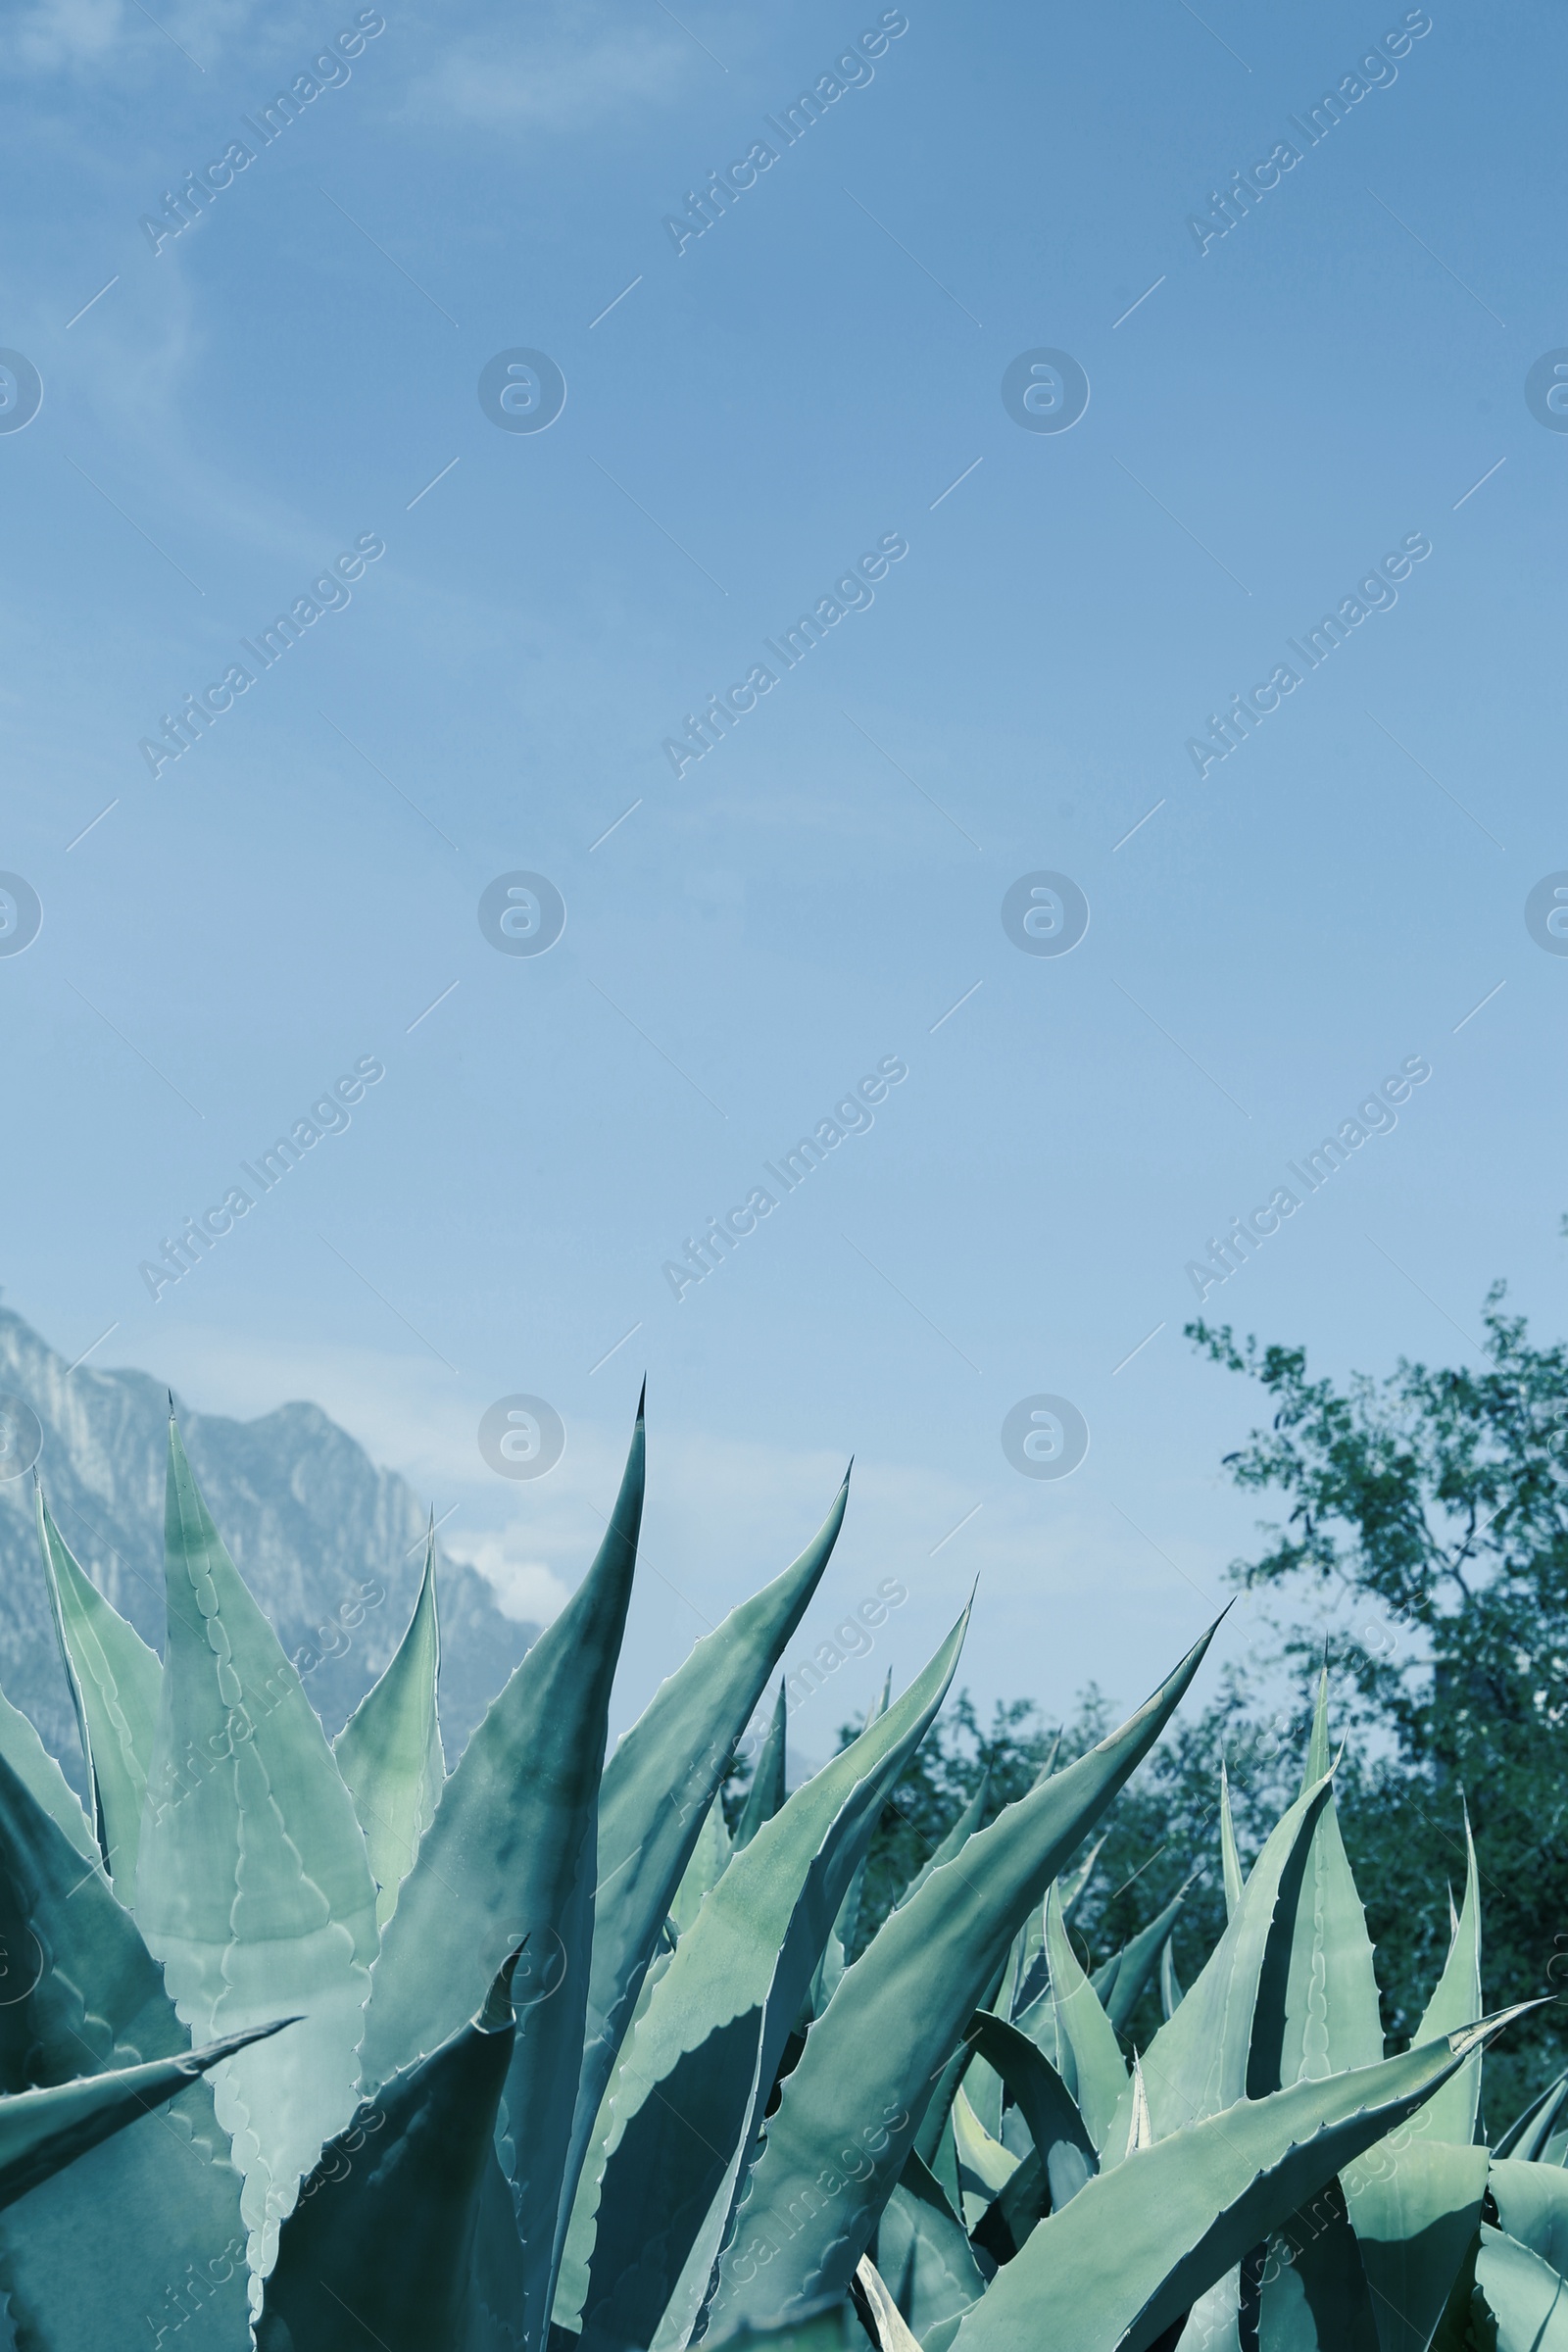 Photo of Beautiful Agave plants growing outdoors on sunny day, low angle view